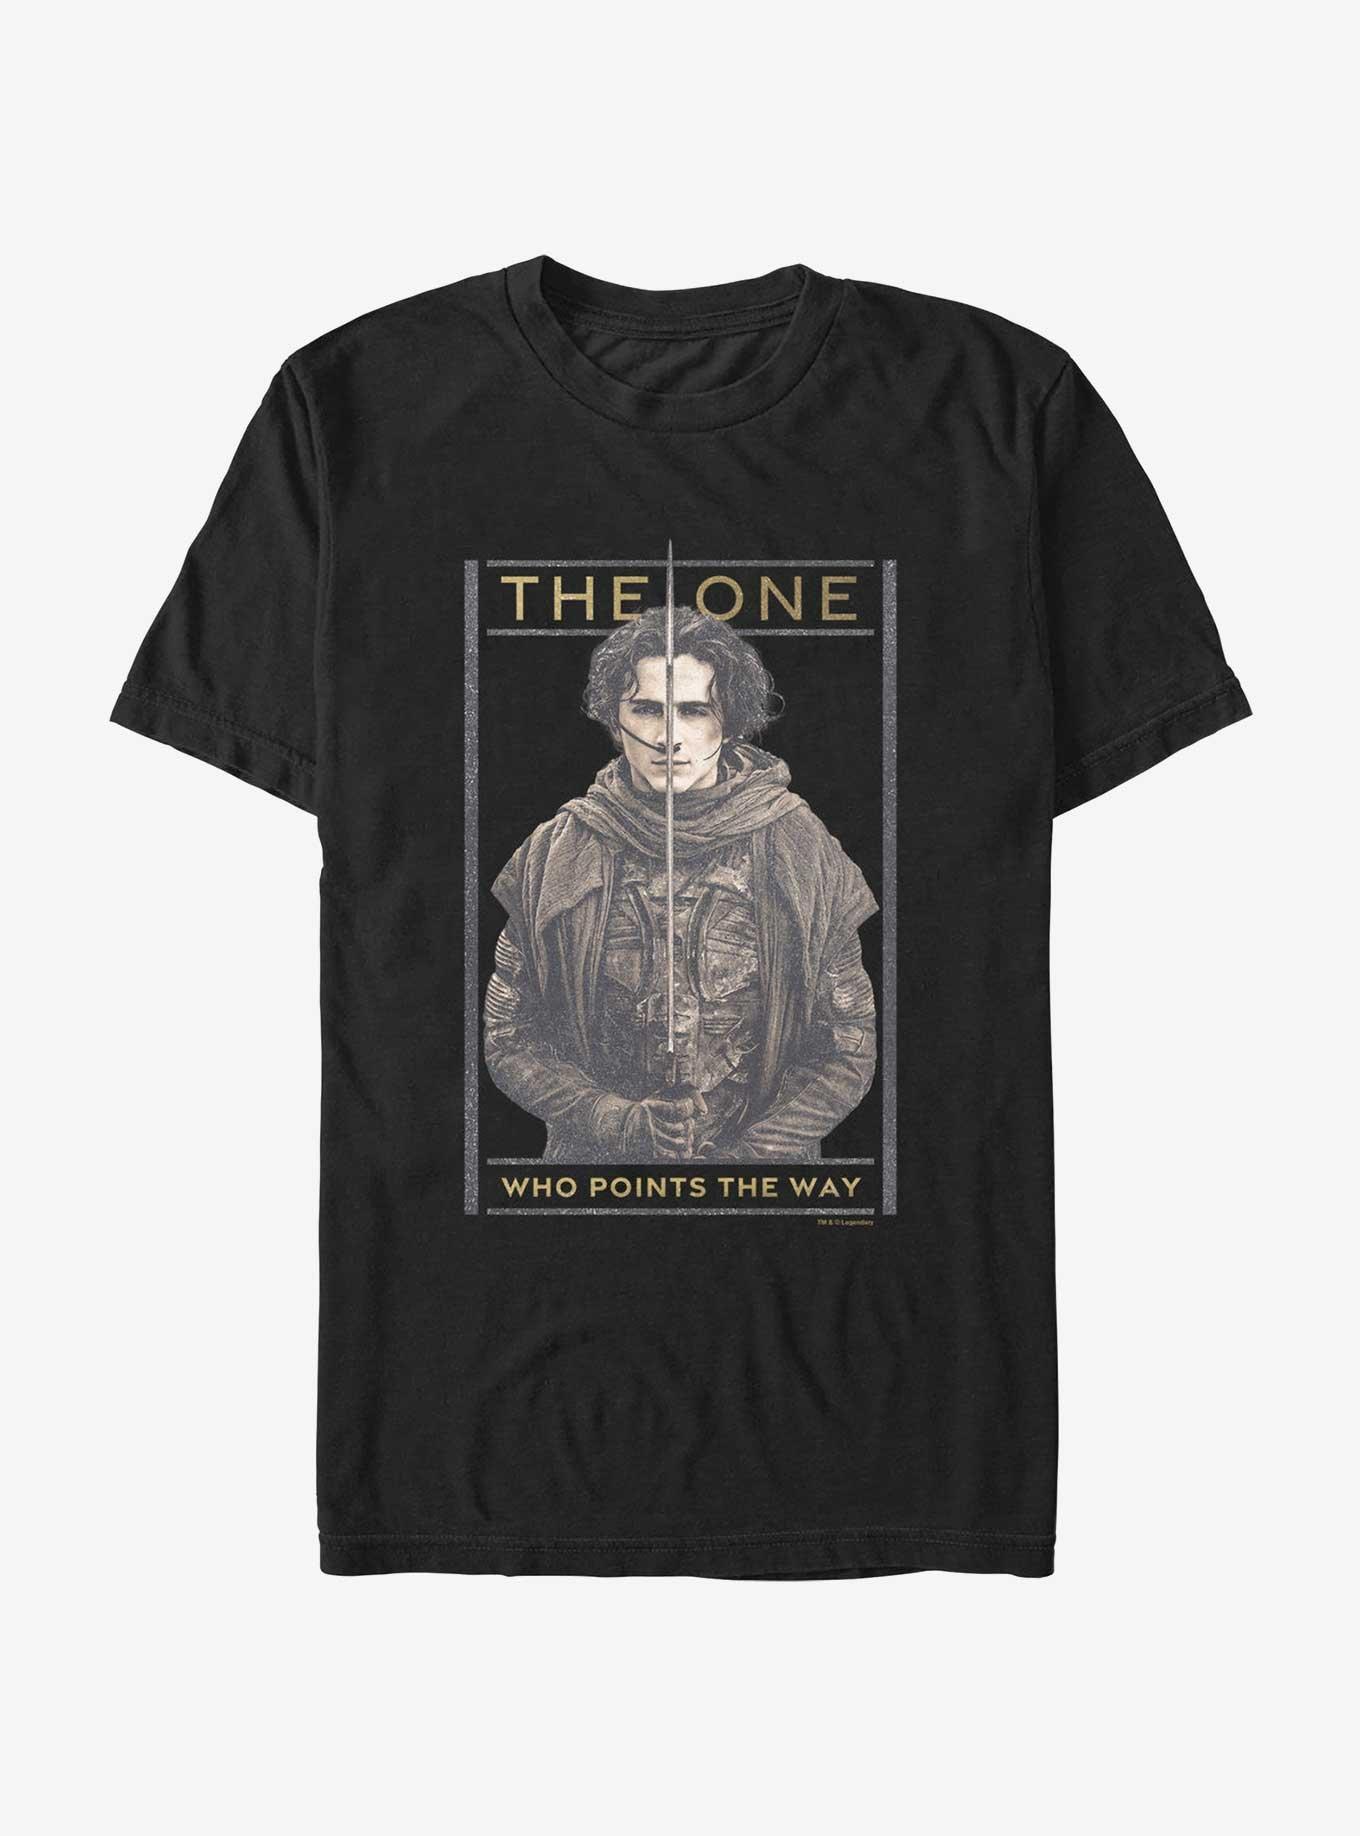 Dune: Part Two Paul The One T-Shirt, BLACK, hi-res